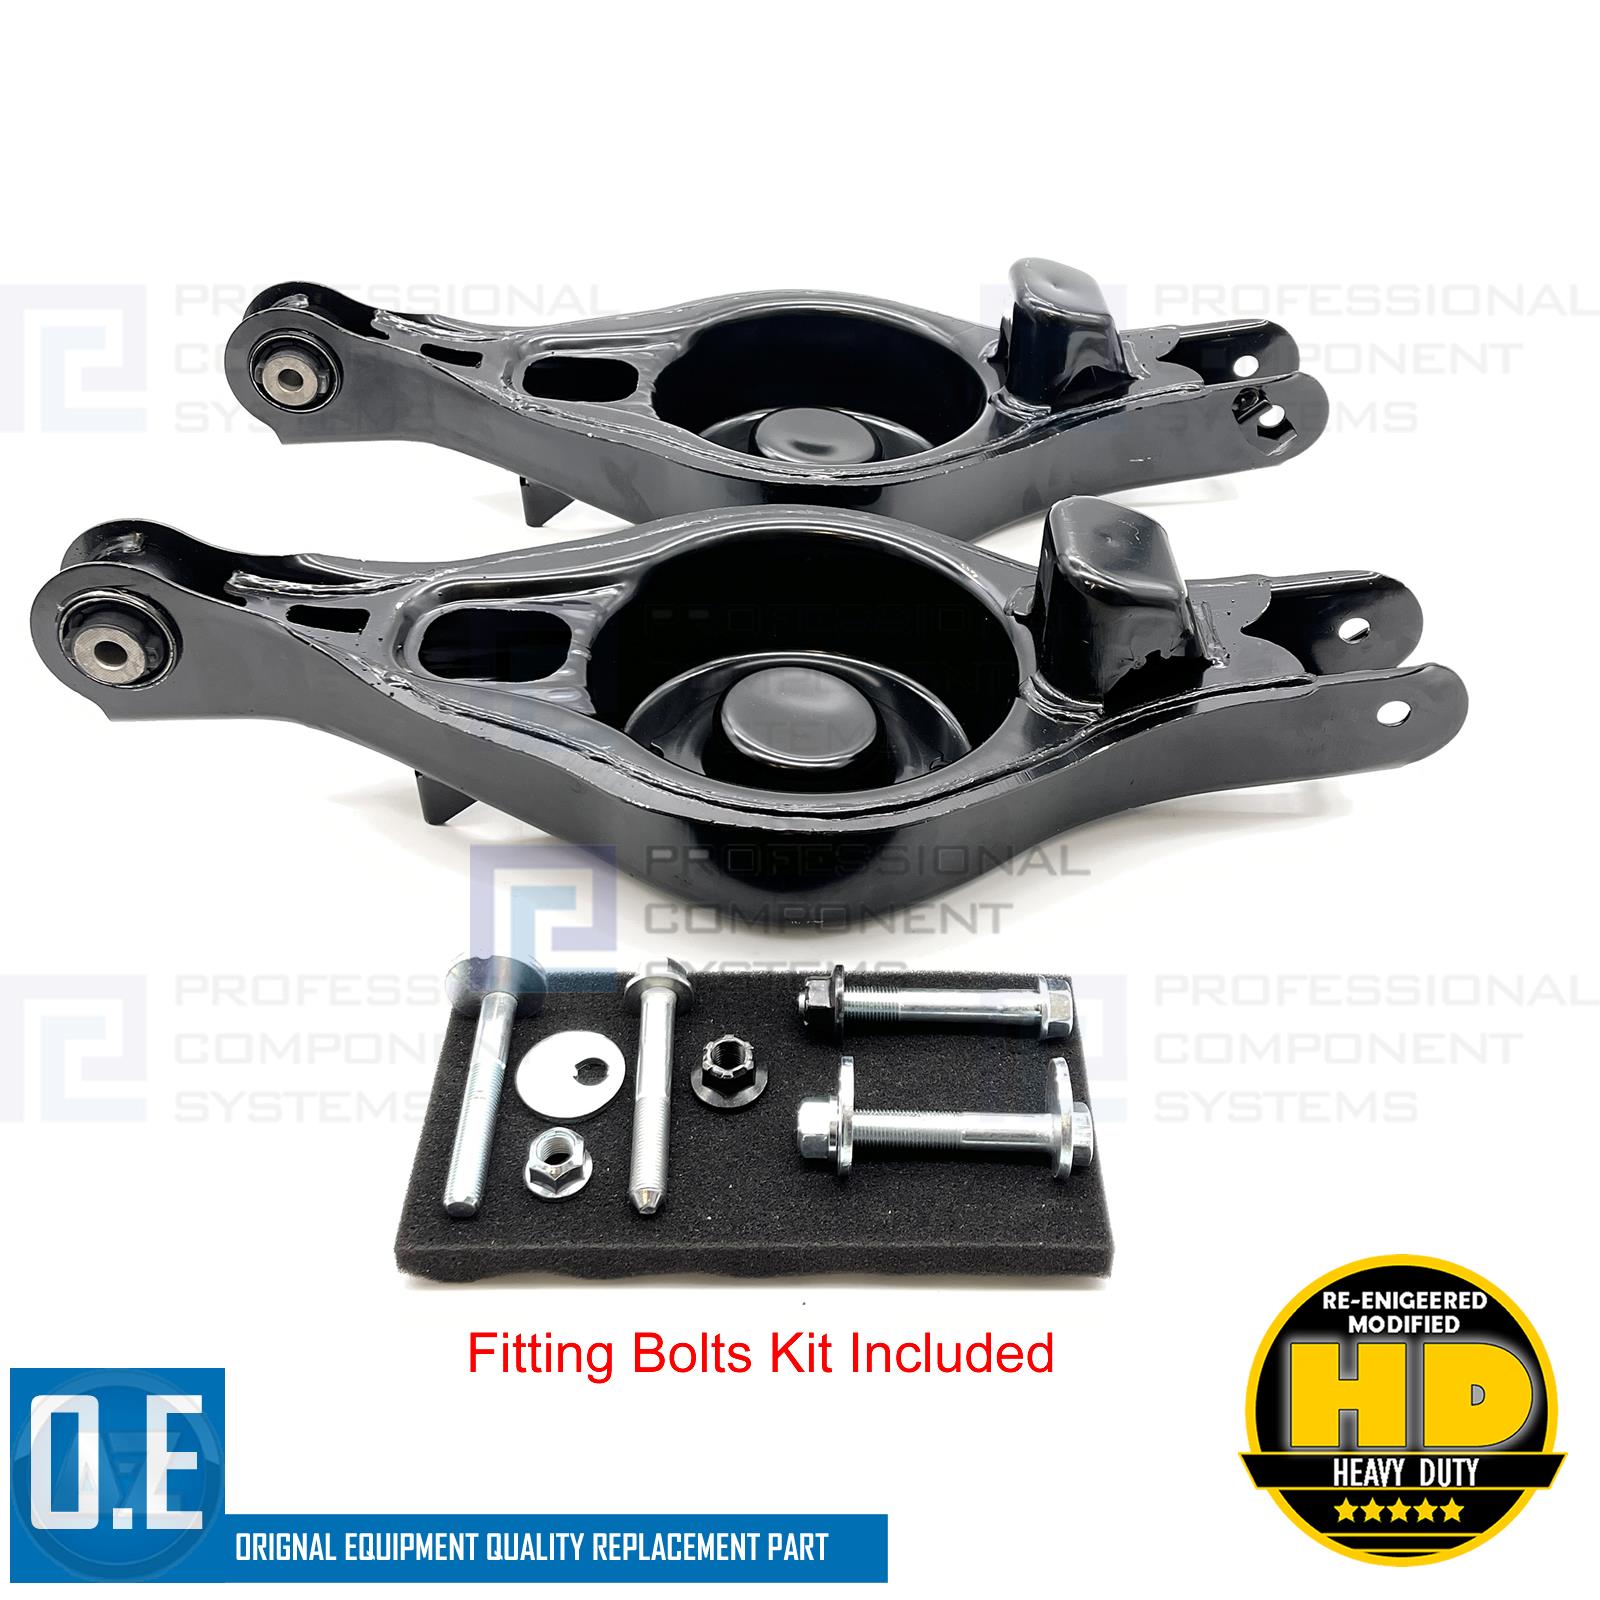 6 KIT GH NUTS SUSPENSION ARMS | eBay 07-13 MAZDA BUSHES RIGHT FOR BOLTS LEFT LOWER REAR